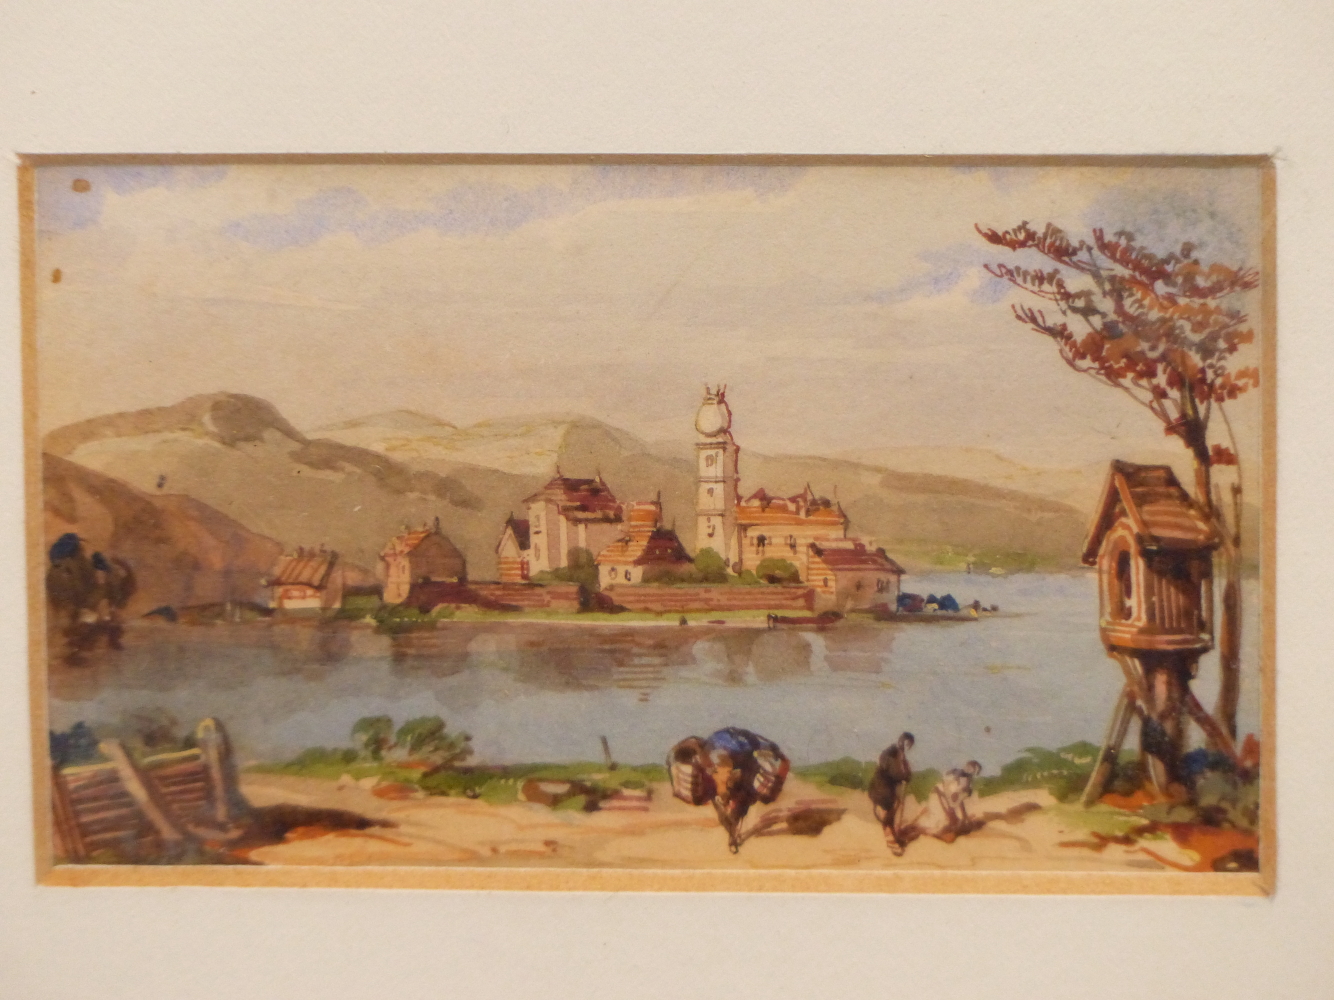 ATTRIBUTED TO JAMES DUFFIELD HARDING (1798-1863) WASSERBURG, FIGURES BY A LAKE IN A MOUNTAINOUS - Image 3 of 6